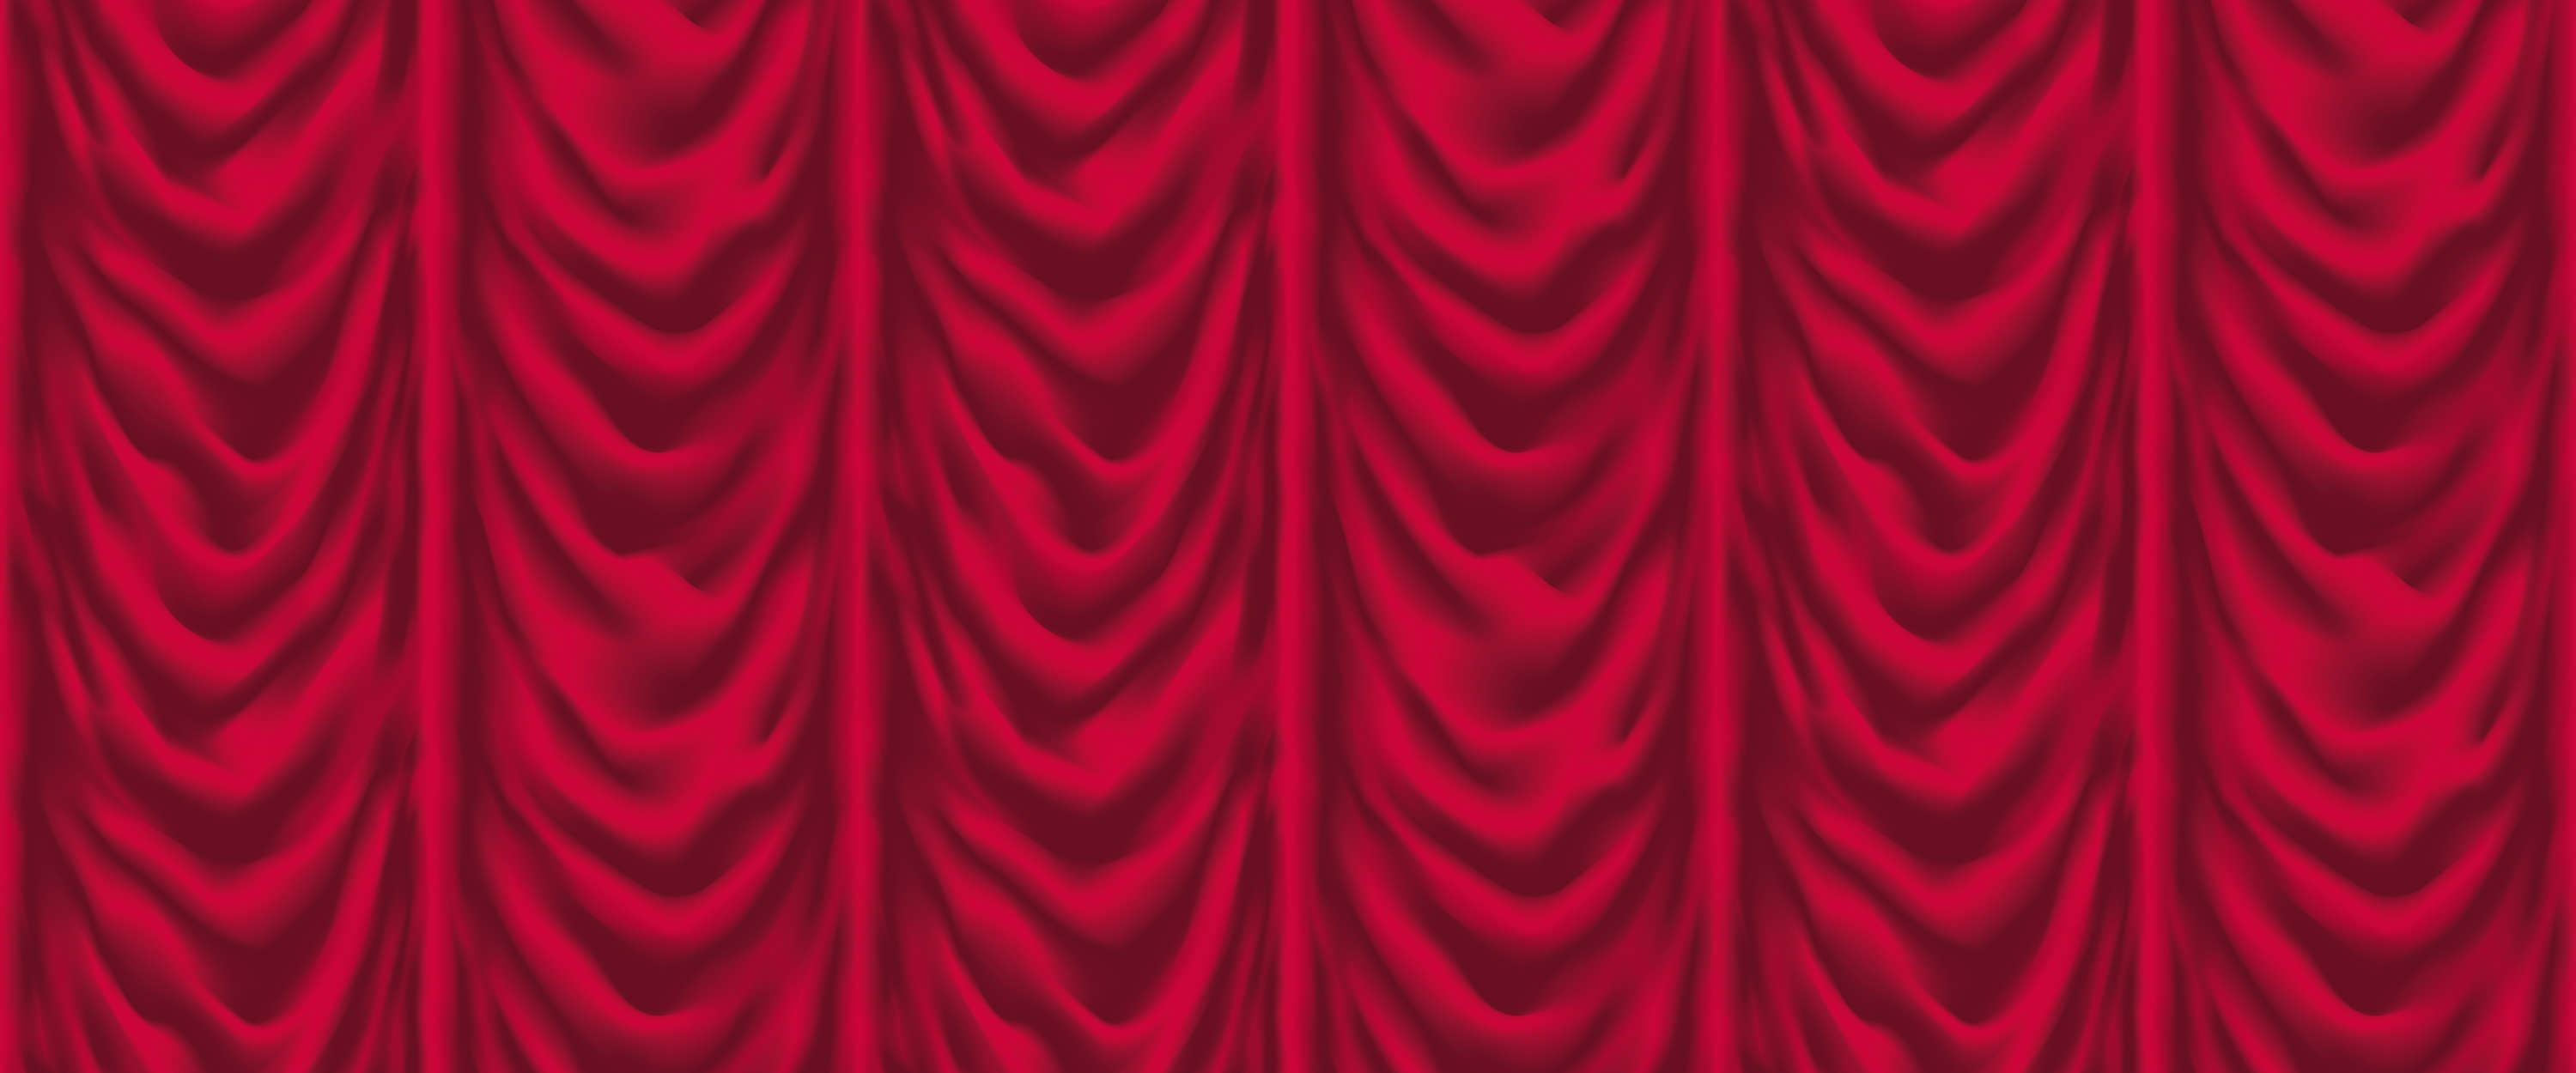             Photo wallpaper red velvet curtain with gathered drapery
        